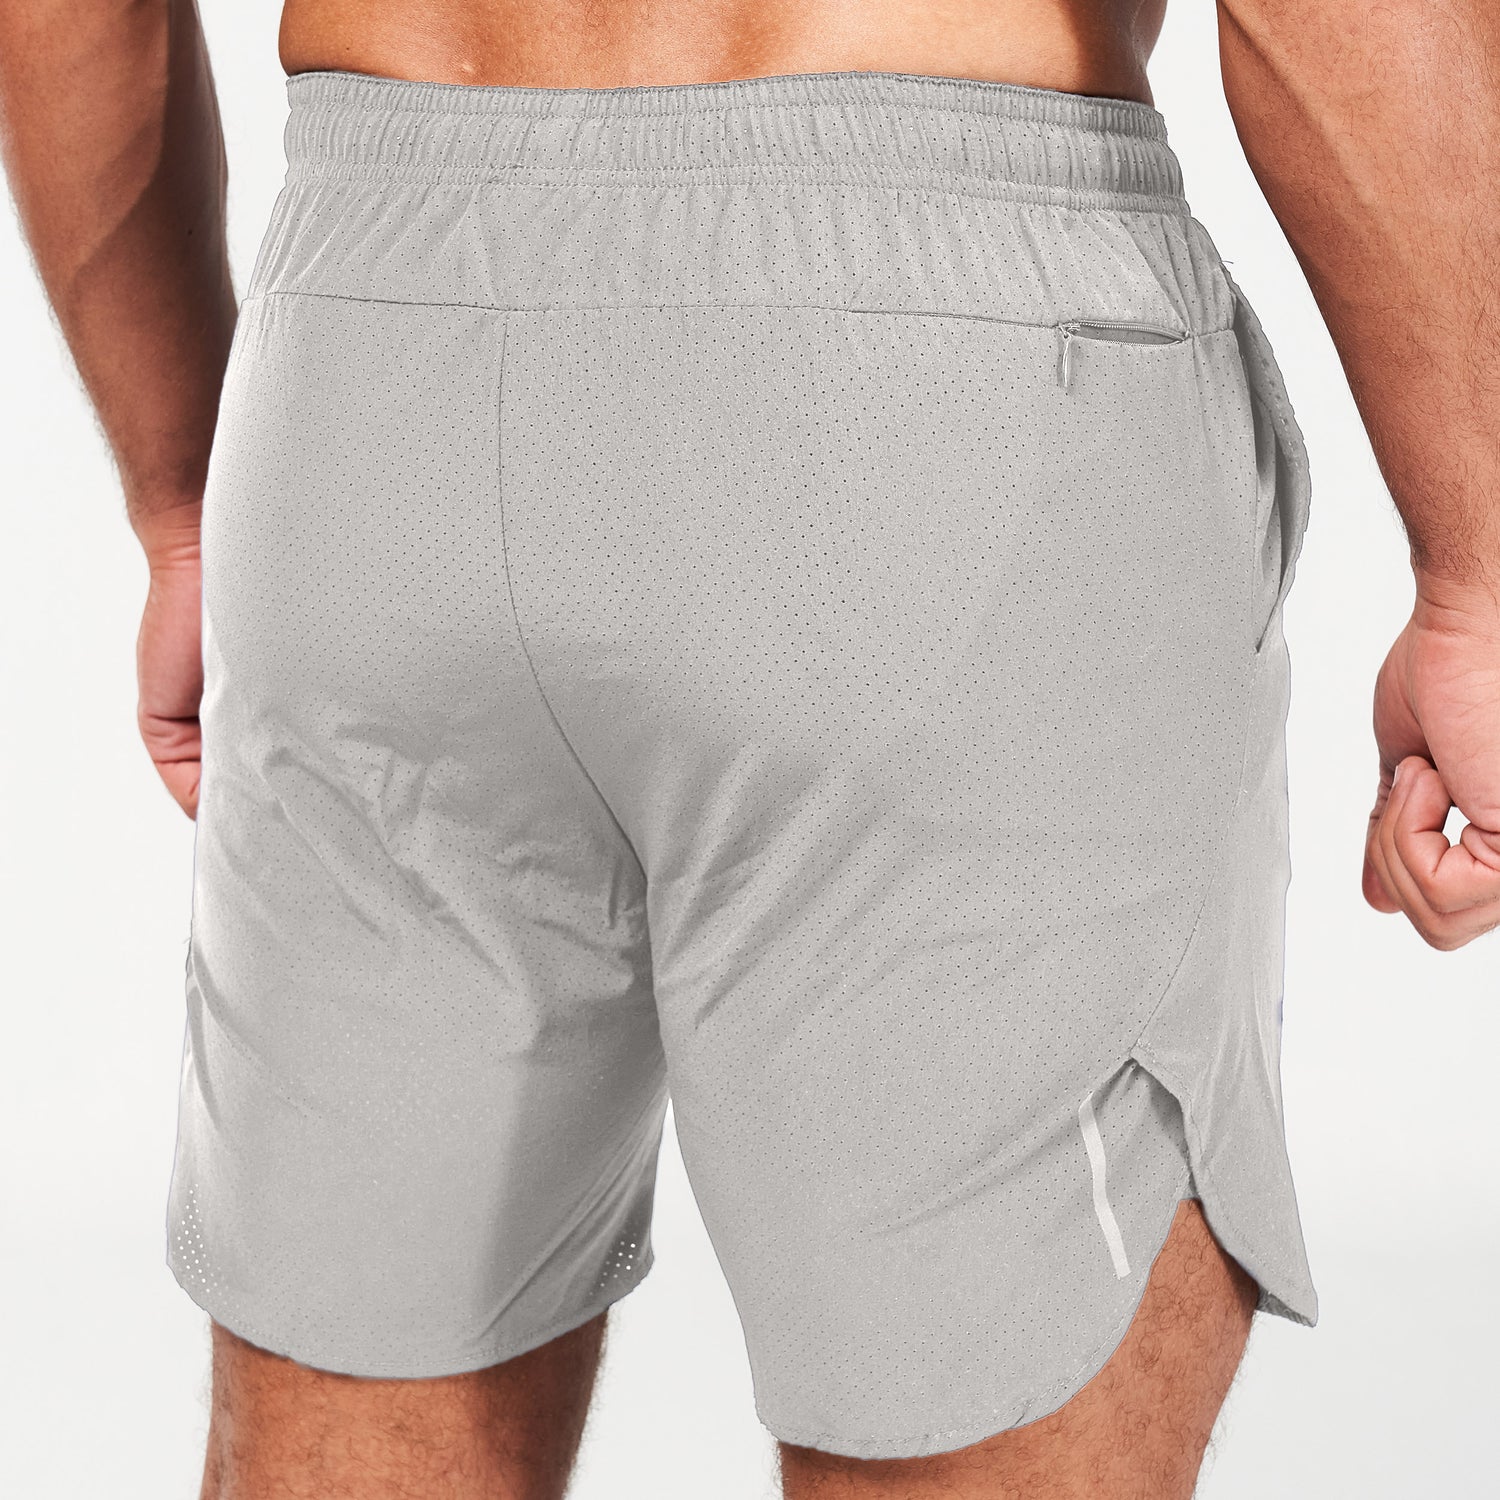 squatwolf-gym-wear-2-in-1-dry-tech-shorts-grey-workout-short-for-men